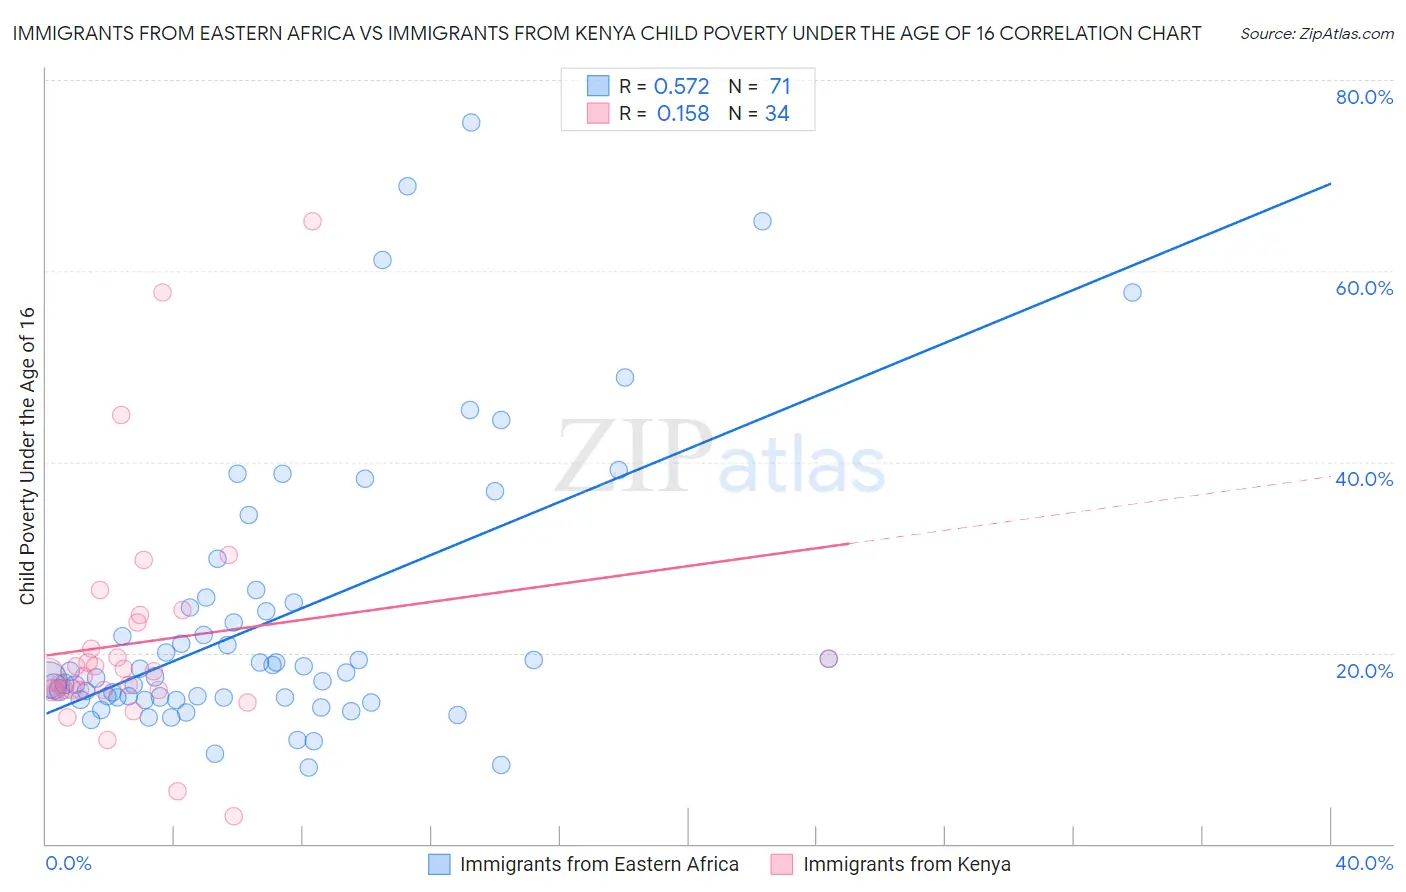 Immigrants from Eastern Africa vs Immigrants from Kenya Child Poverty Under the Age of 16